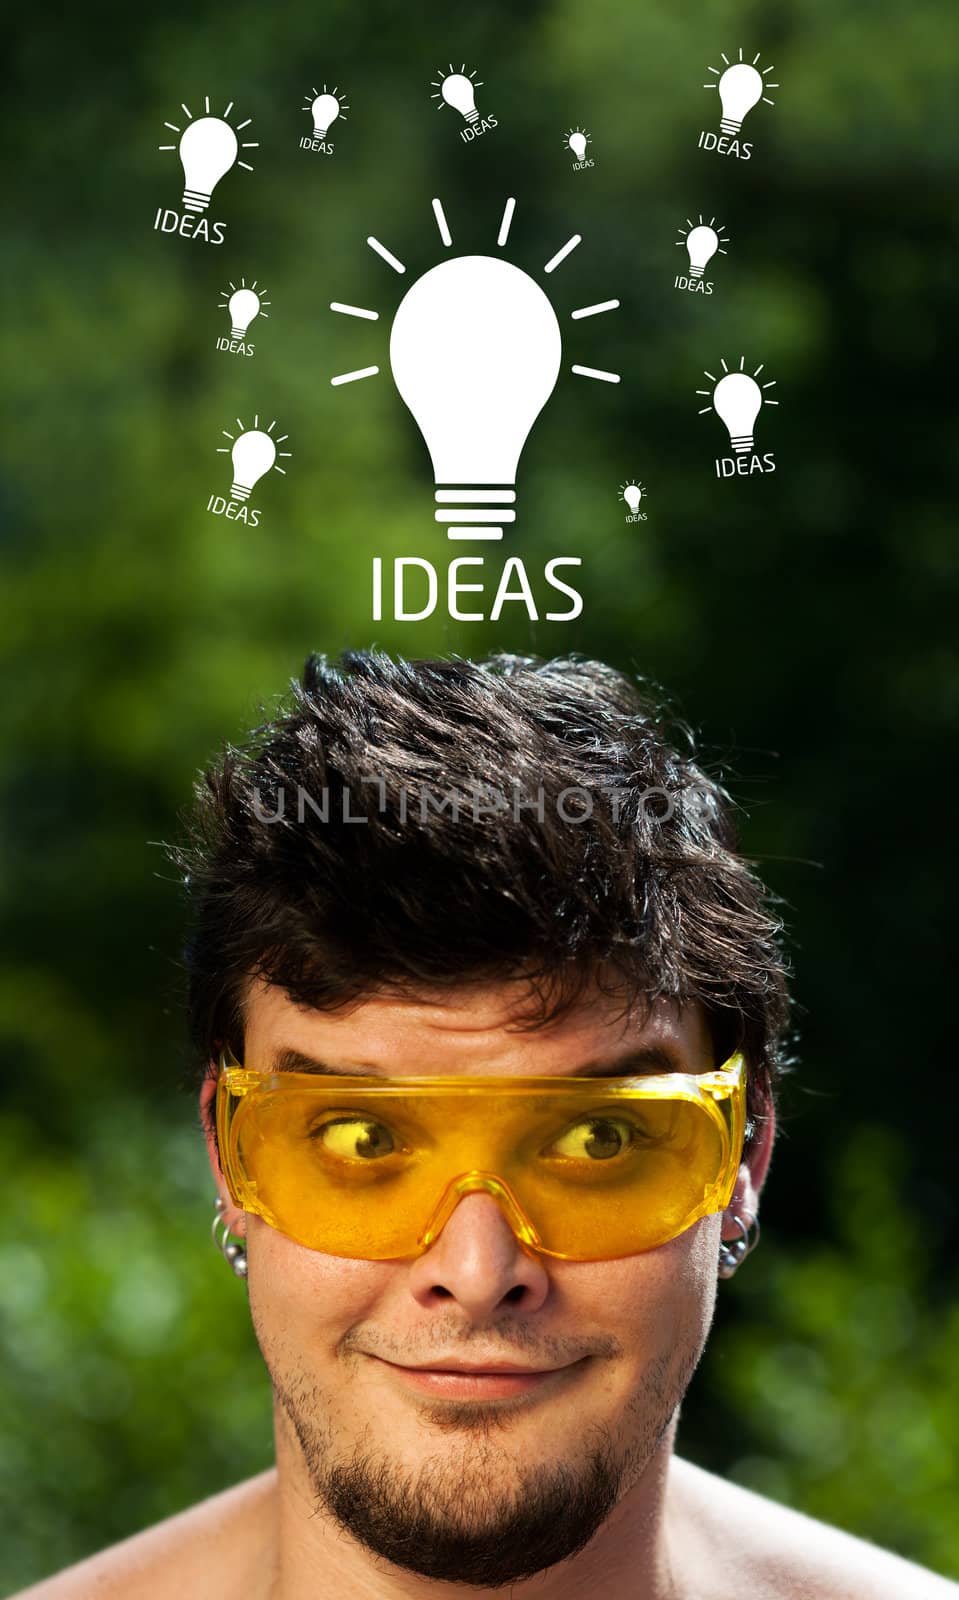 Young persons head looking with gesture at idea type of sign